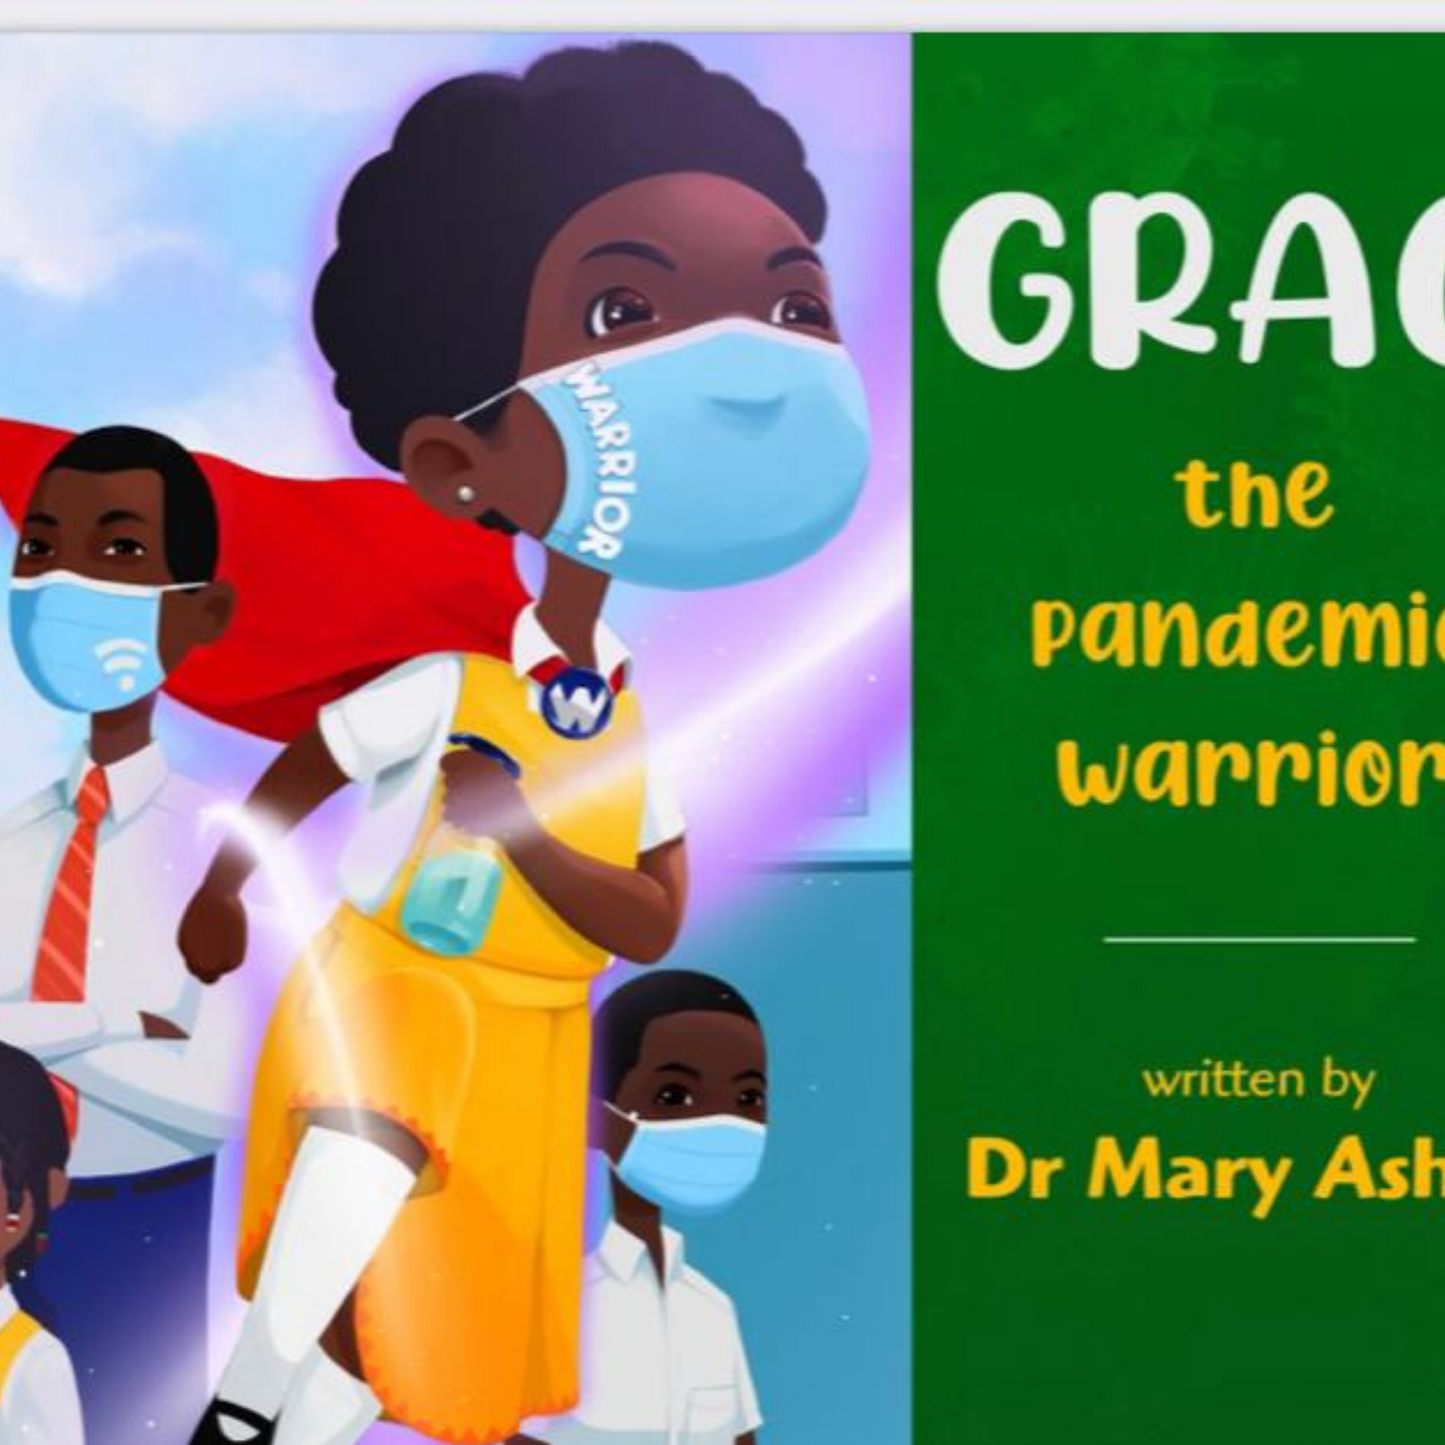 Grace the Pandemic Warrior